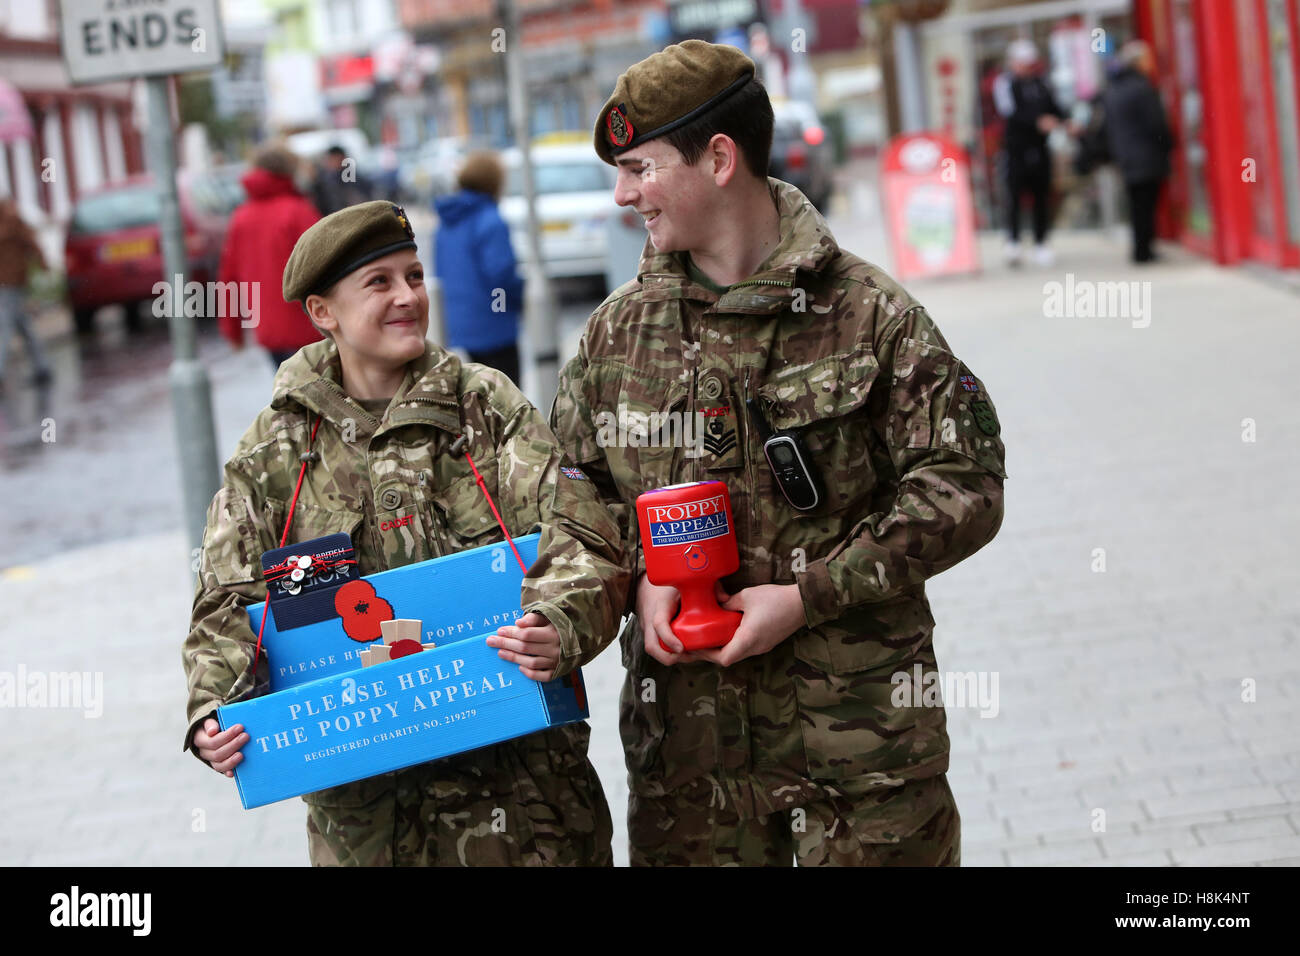 Young Army cadets pictured in Bognor Regis High Street selling poppies for the Poppy Appeal and to mark Remembrance Day. UK. Stock Photo